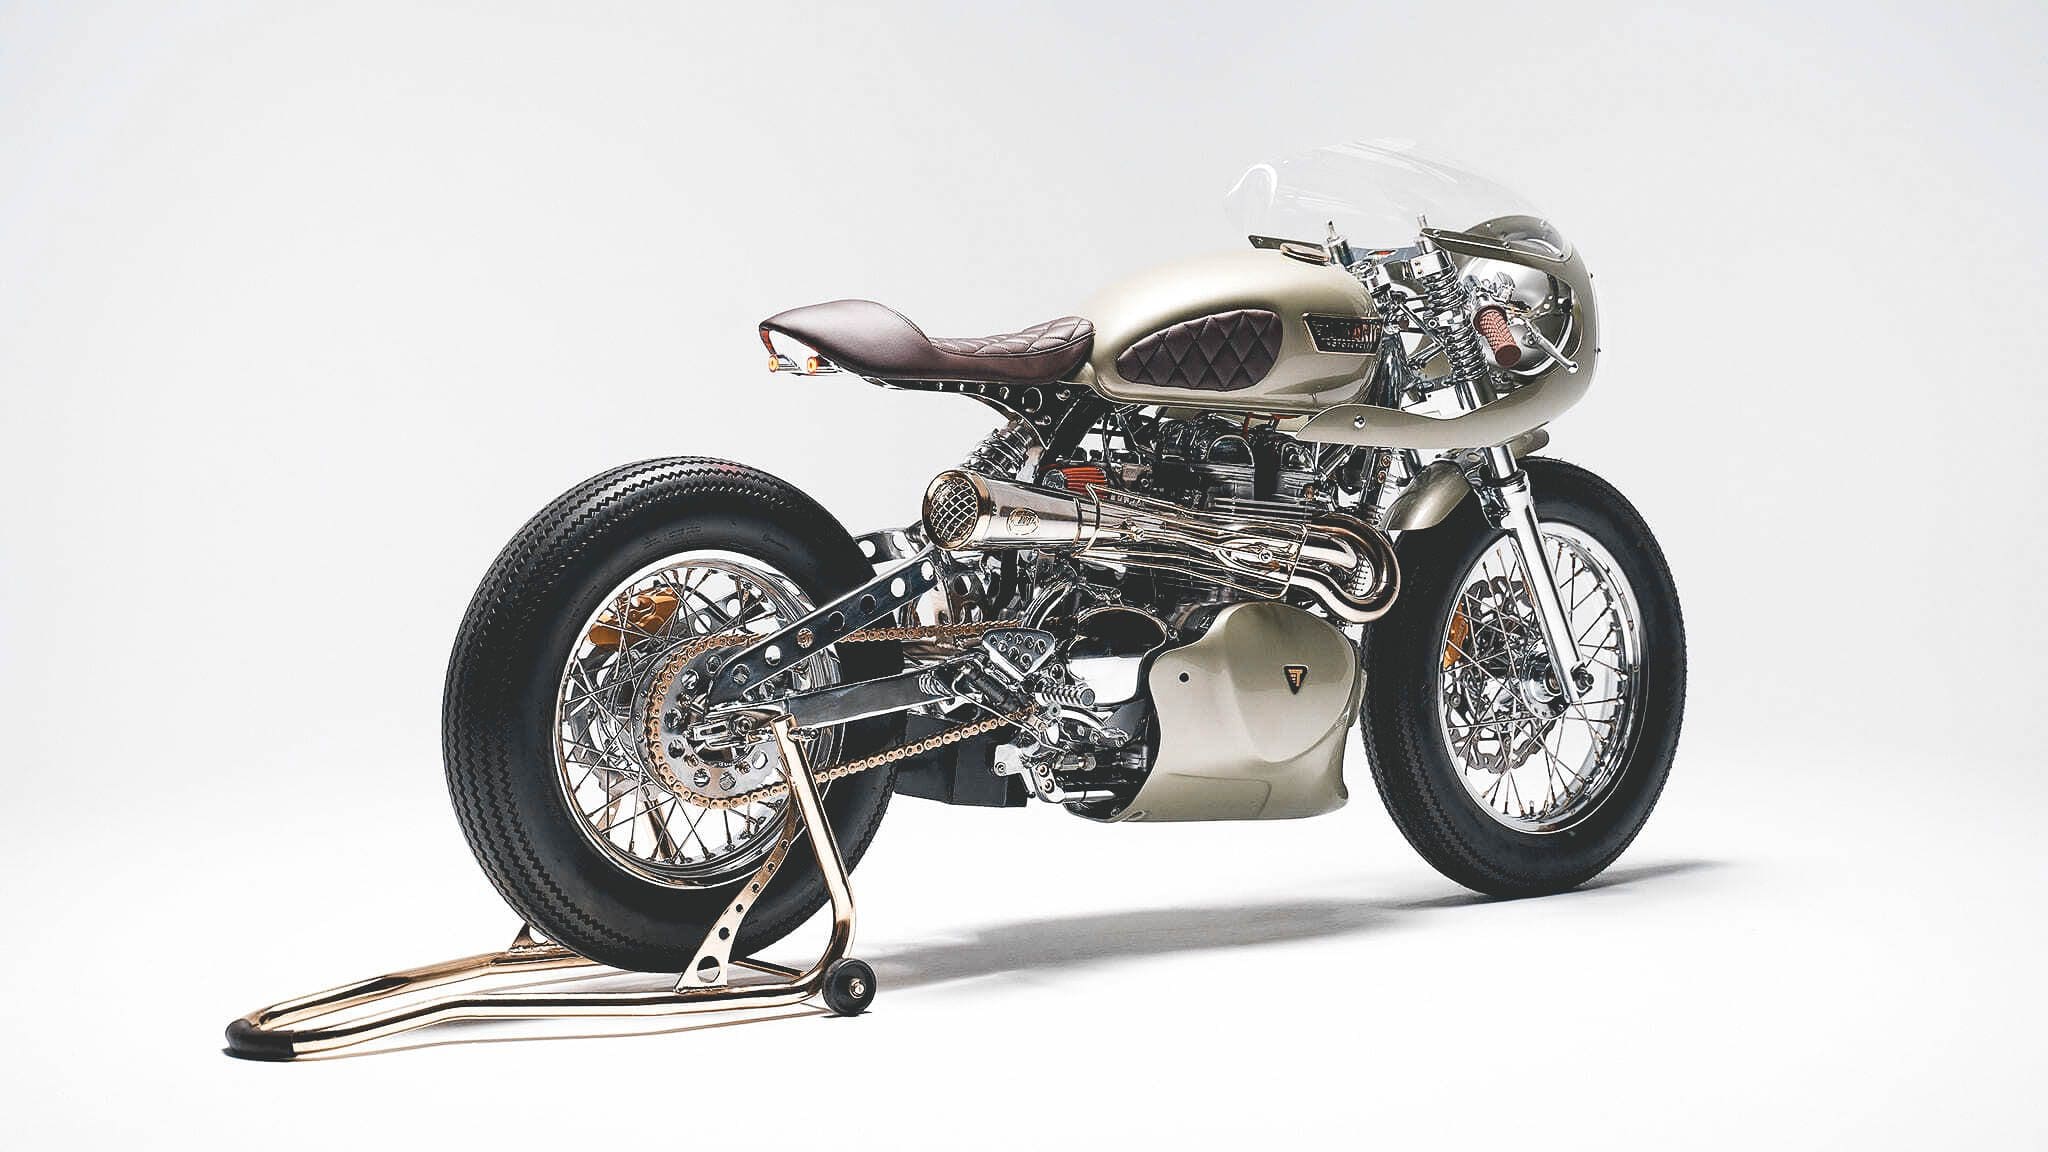 , Uit het archief: 5 hele-hele dikke custom <strong>caferacers</strong>